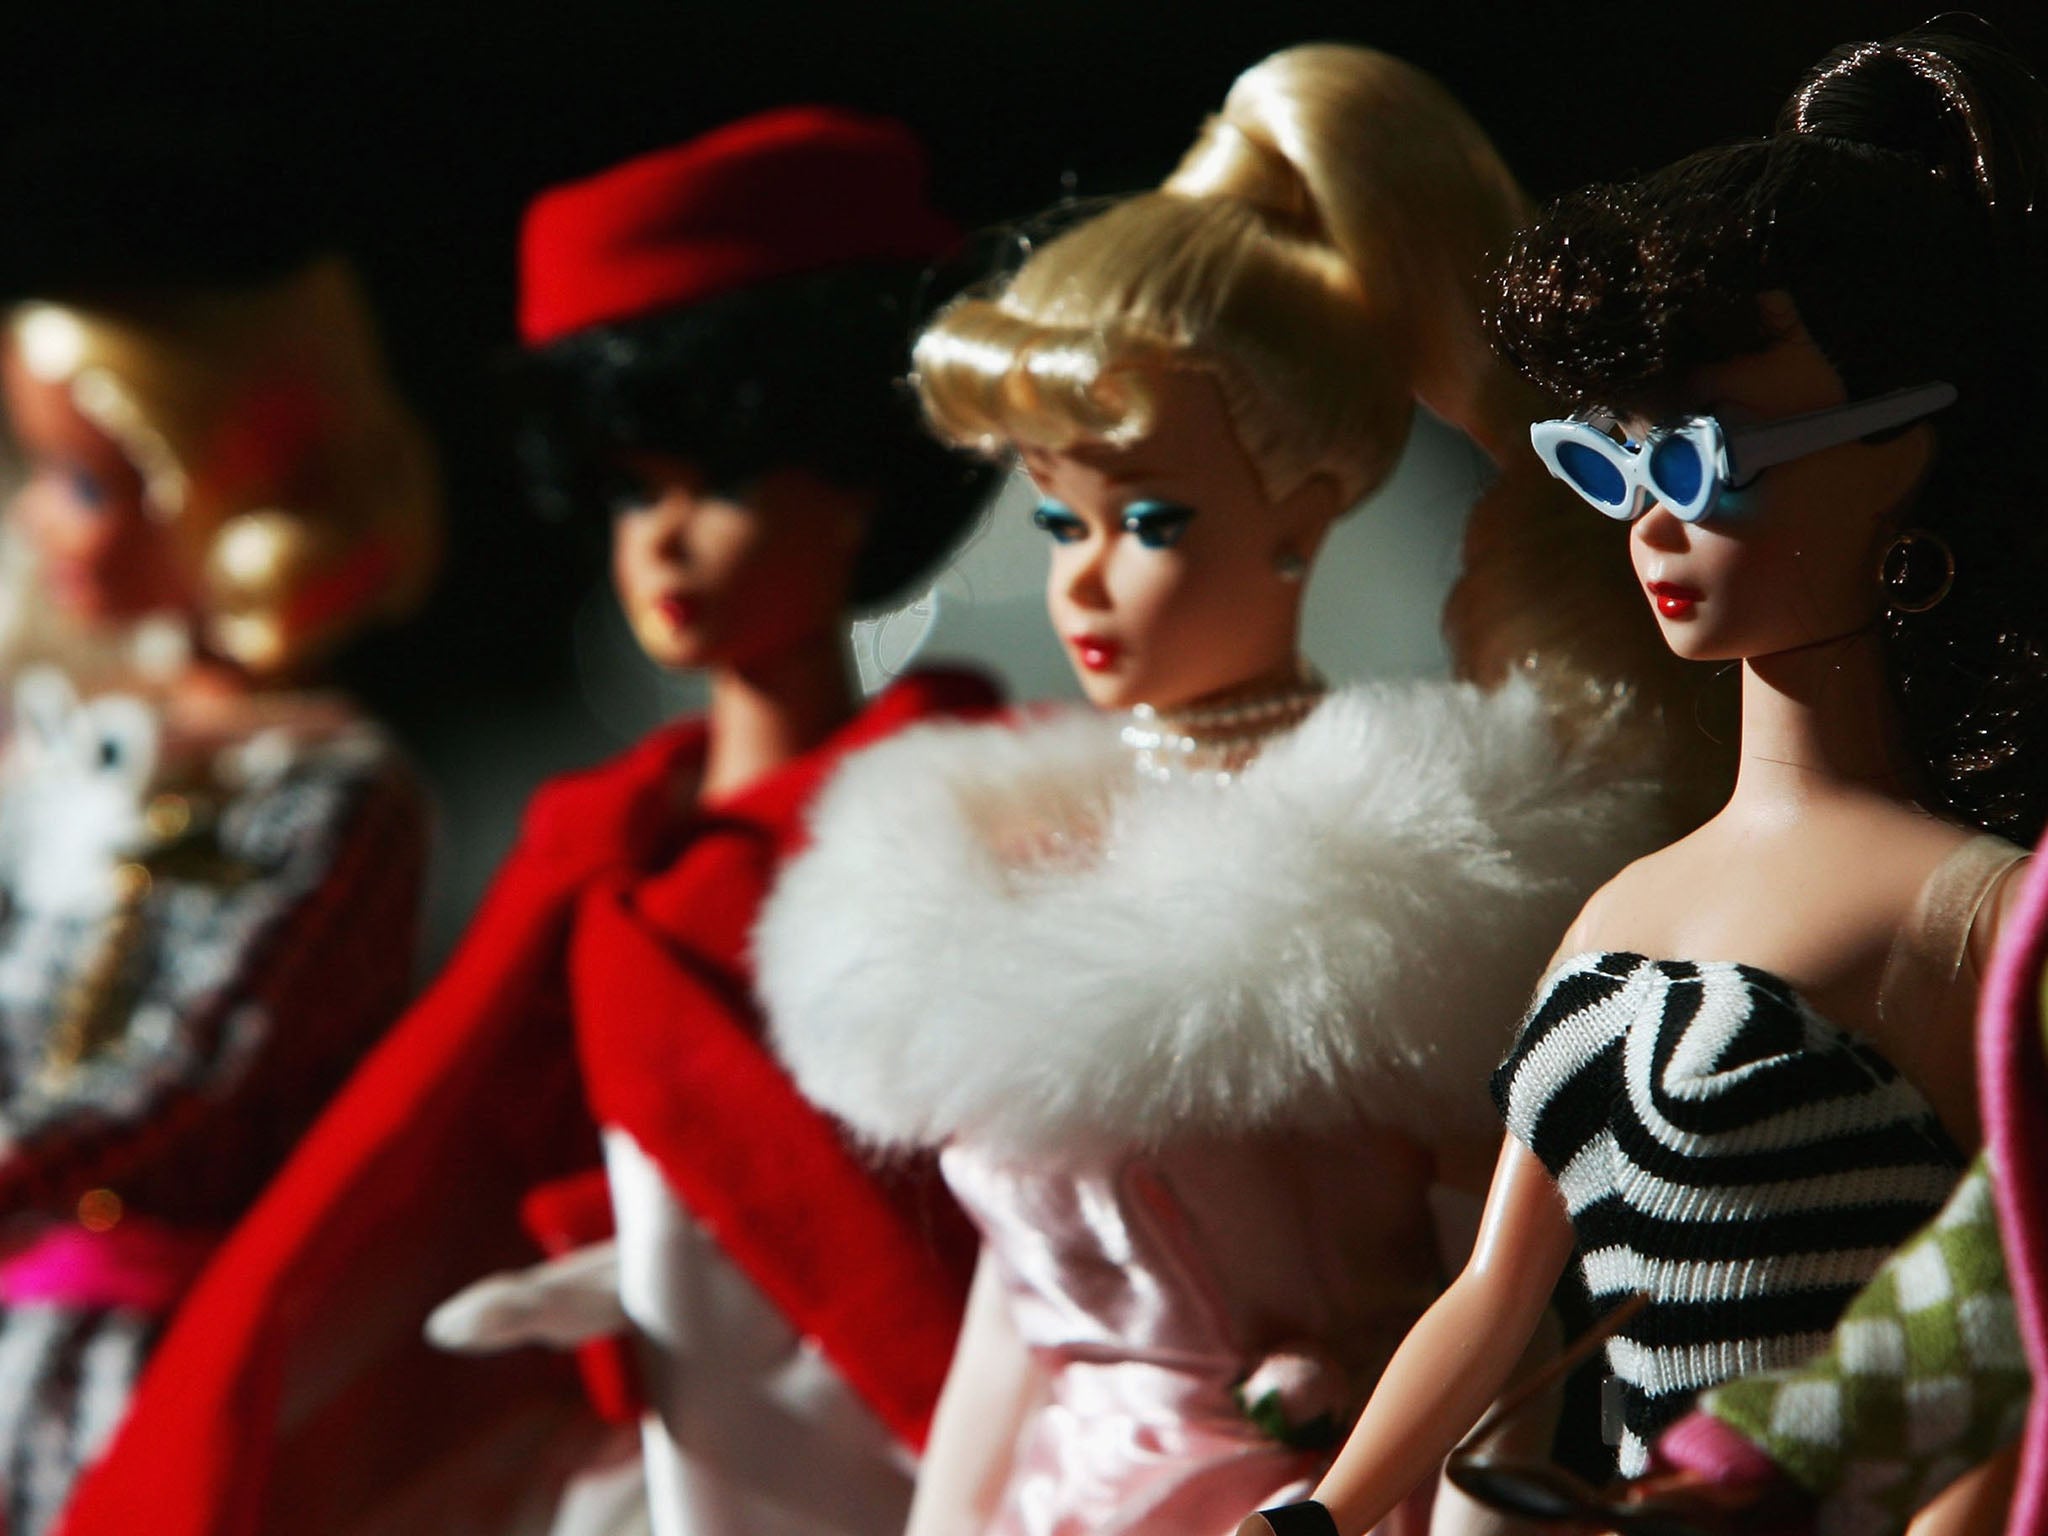 Barbie first debuted to the public in 1959